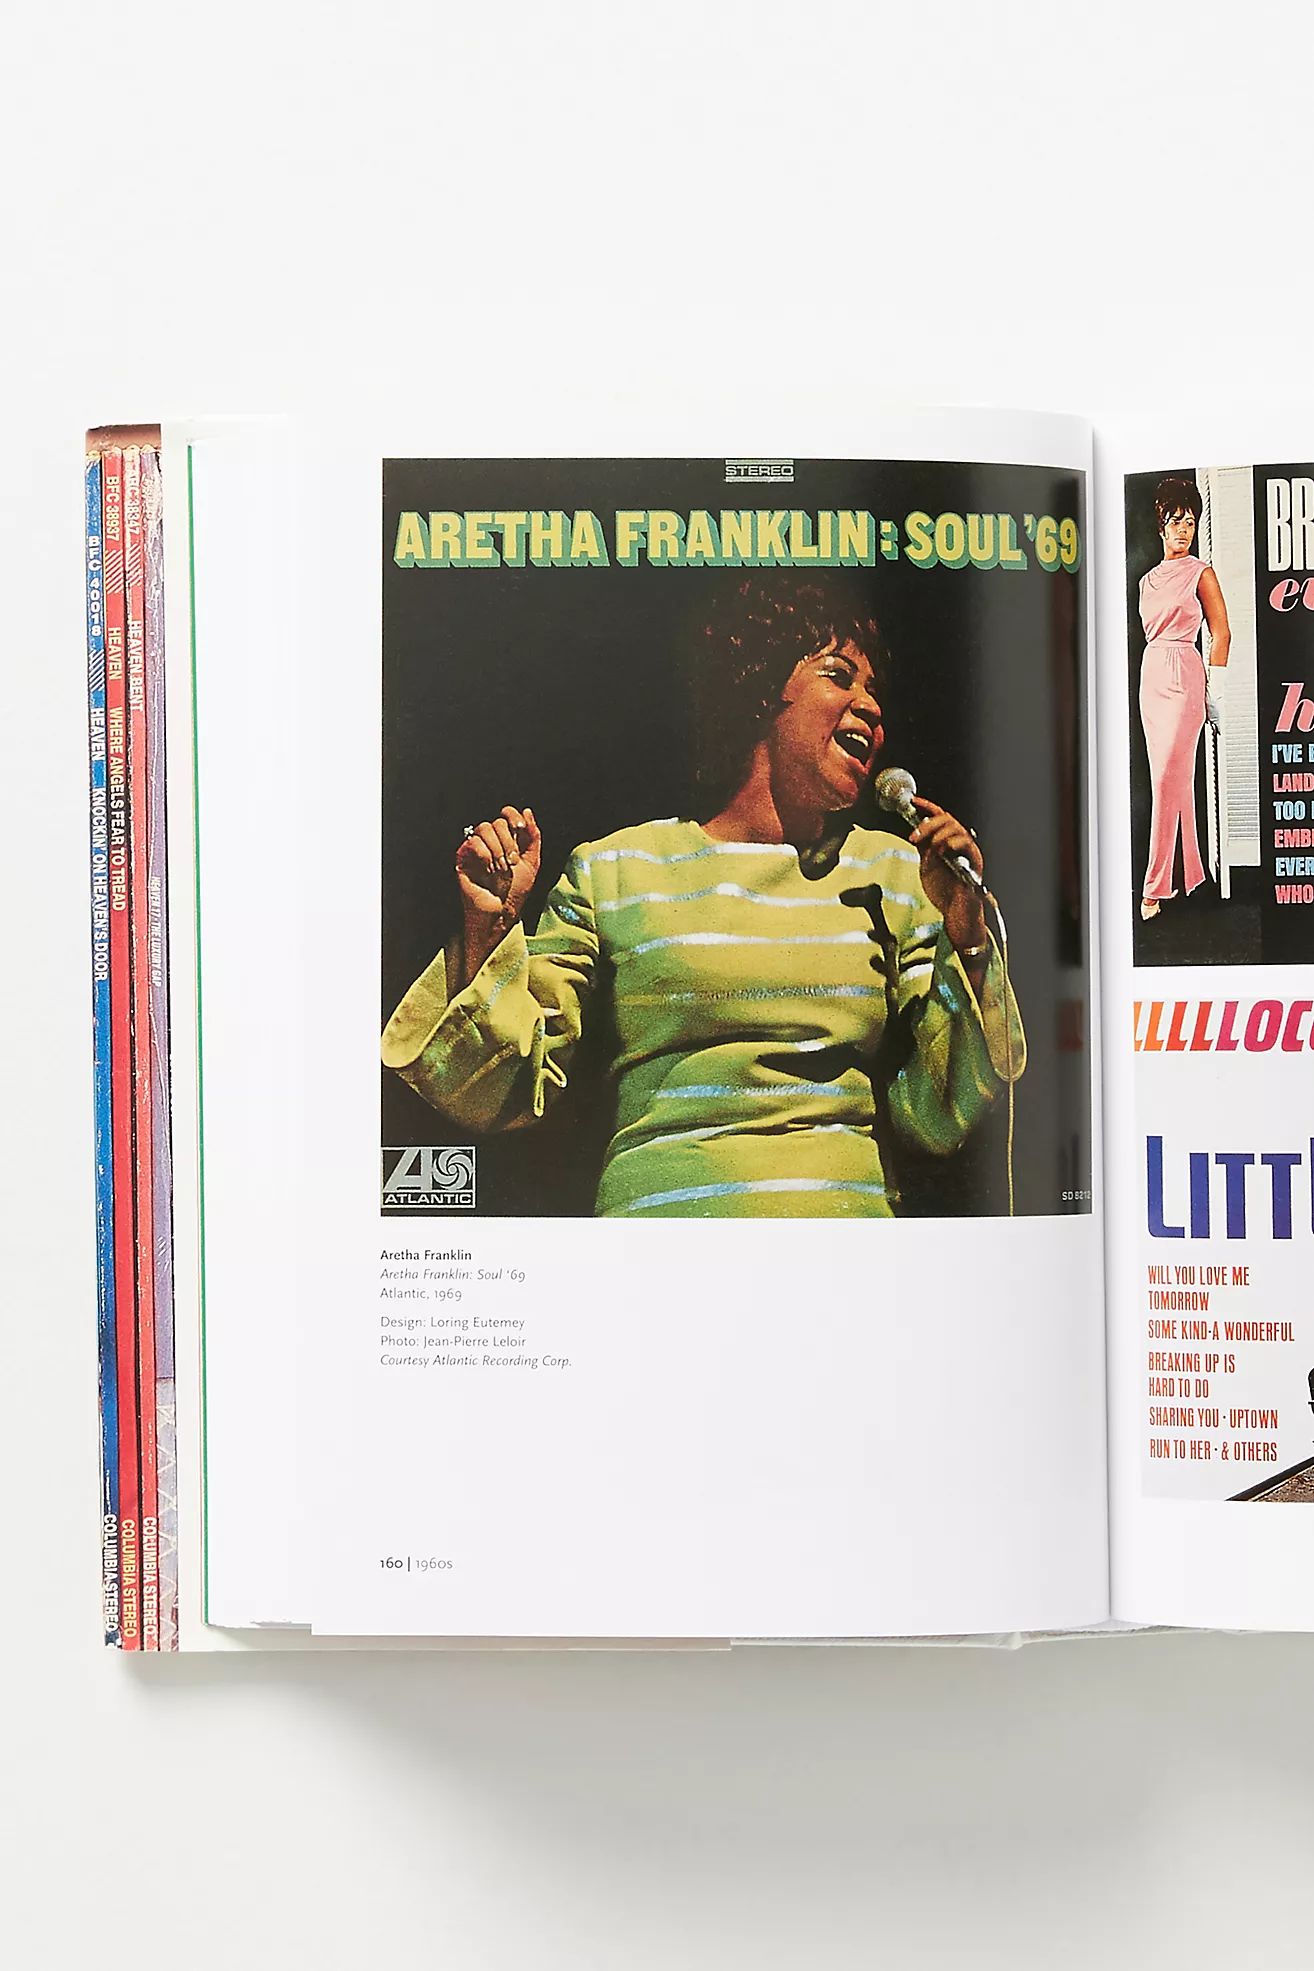 1,000 Record Covers | Anthropologie (US)